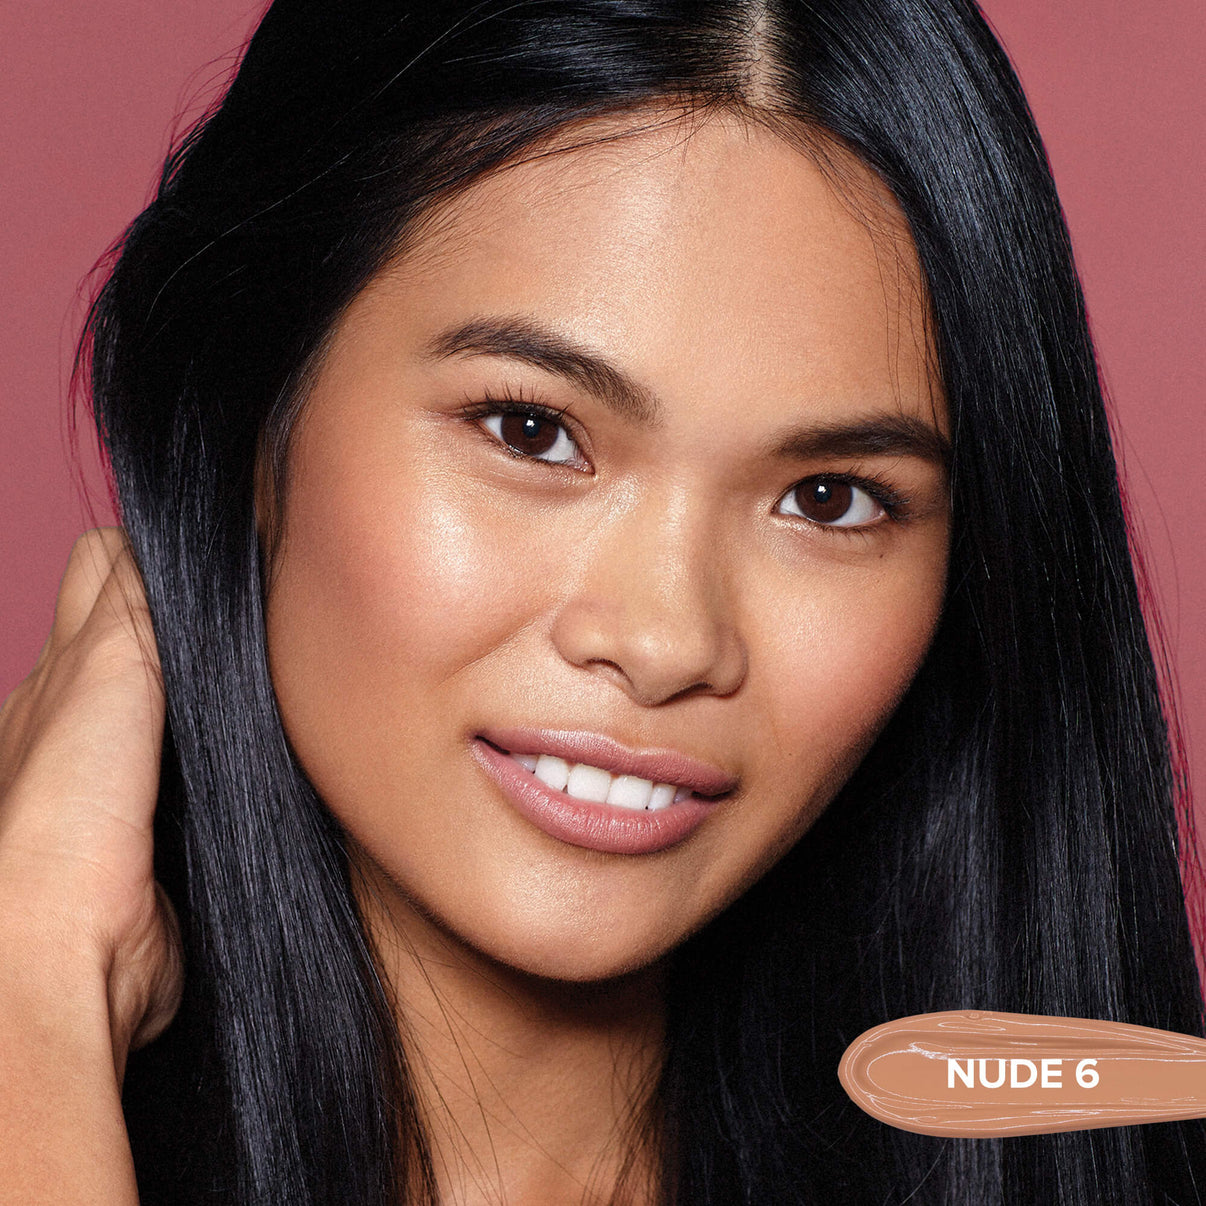 Young woman wearing Tinted Cover Liquid Foundation in shade nude 6